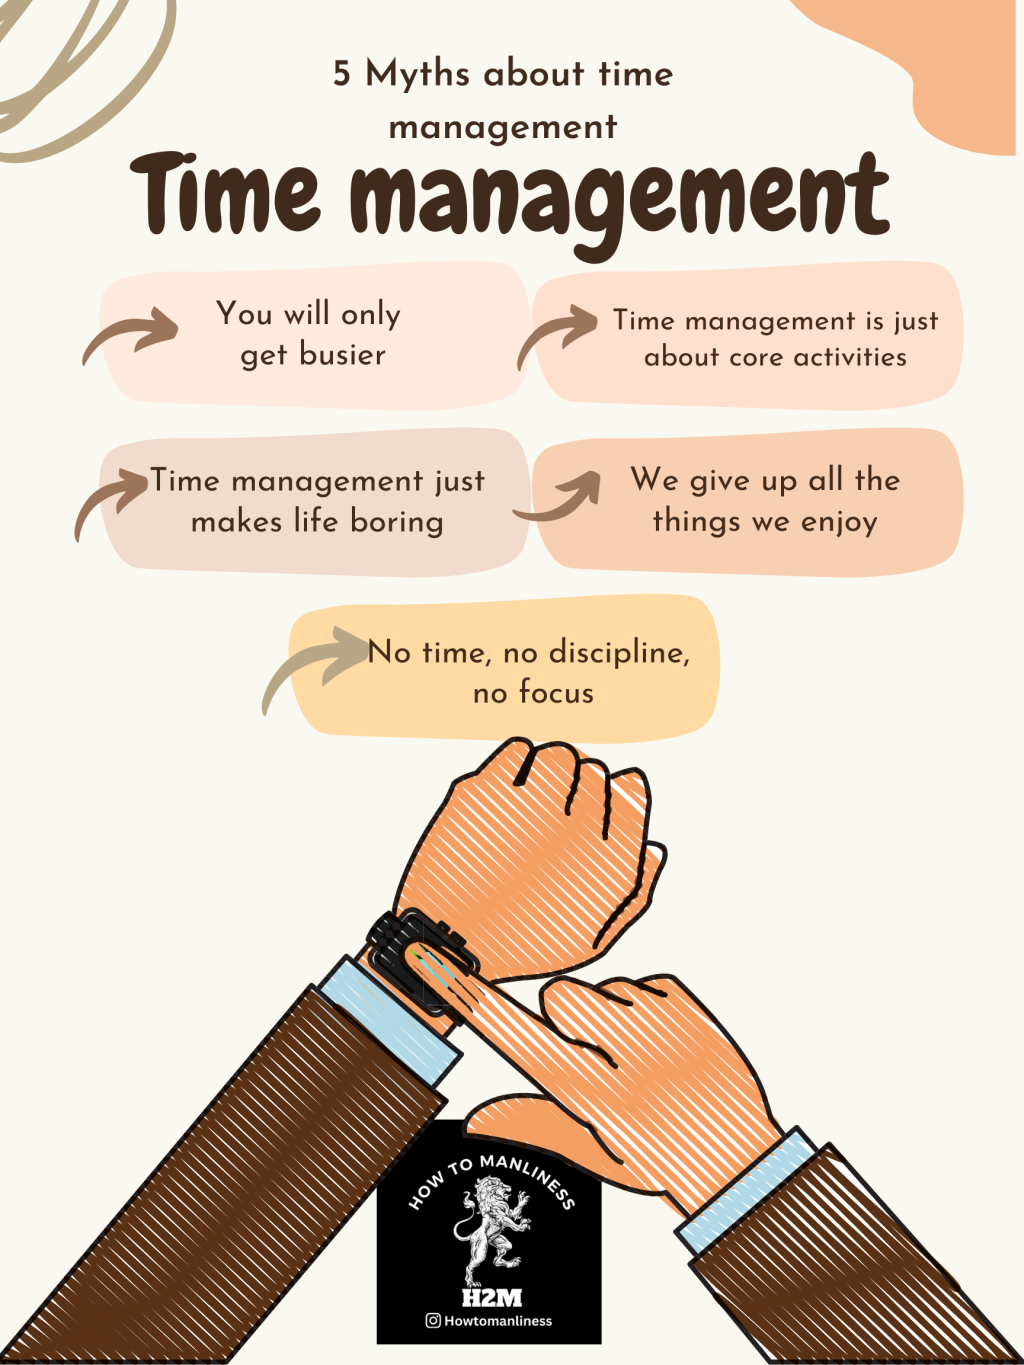 5 myths about time management